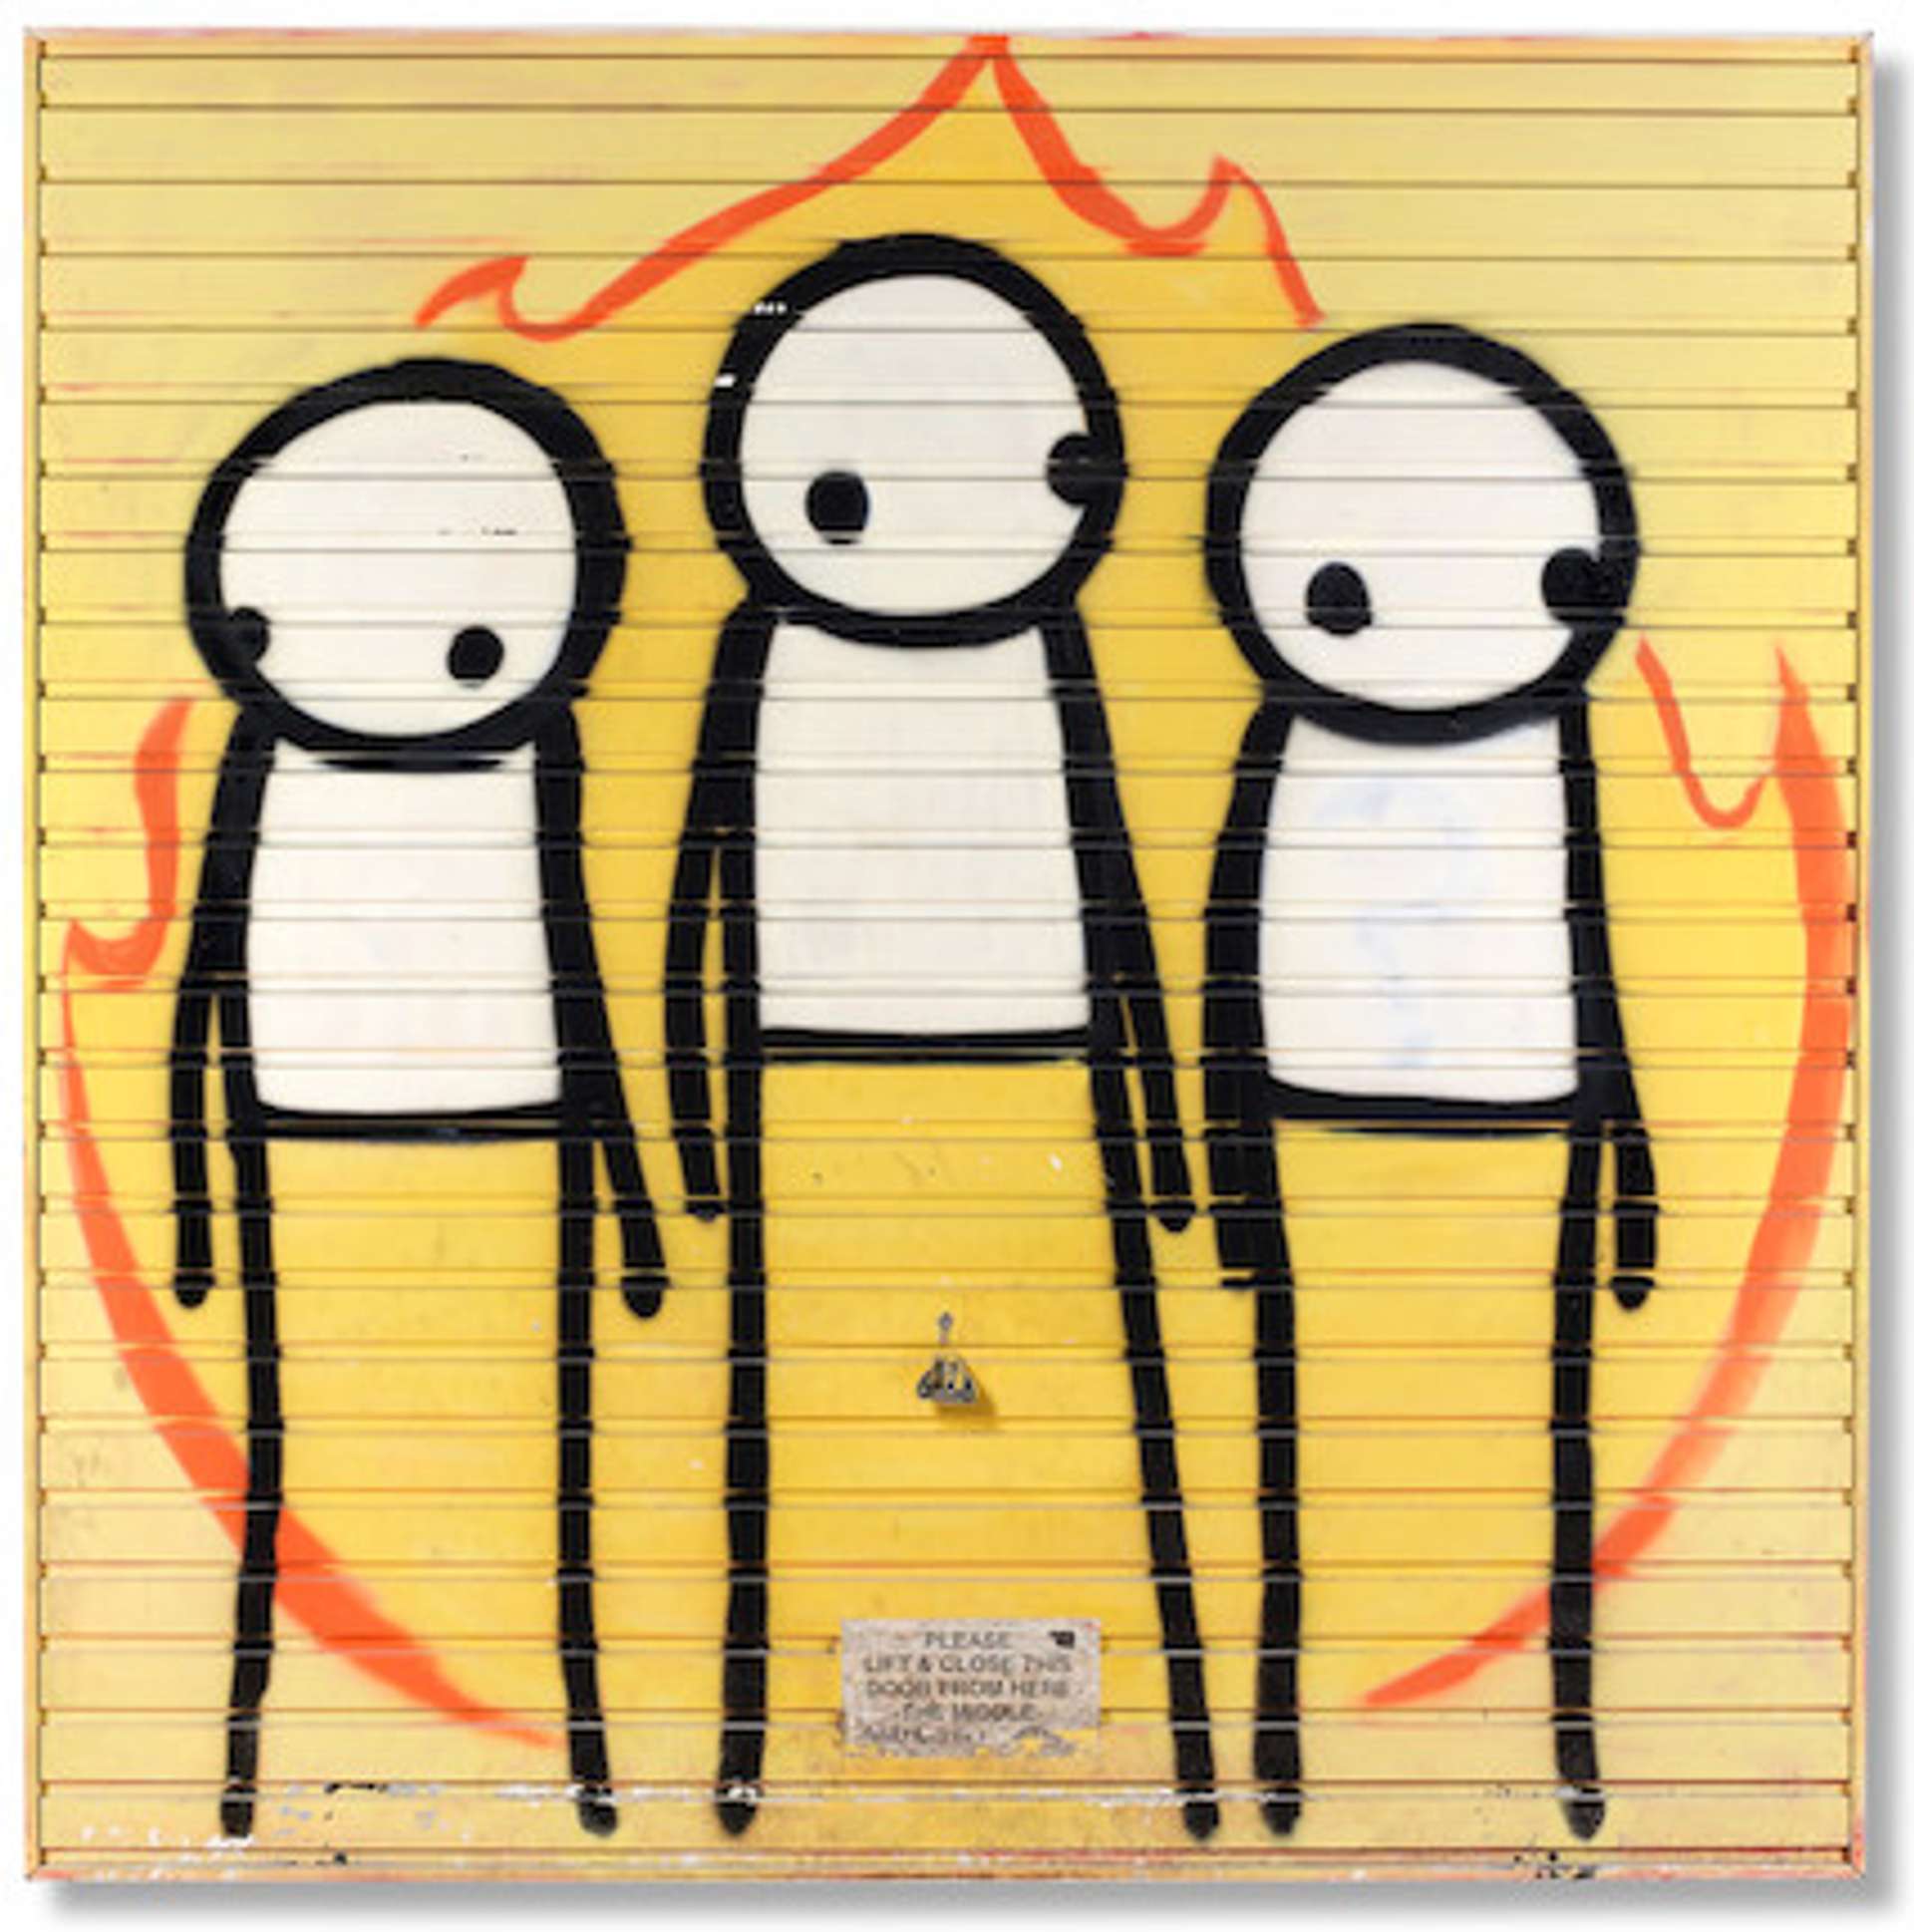 Children of Fire by Stik